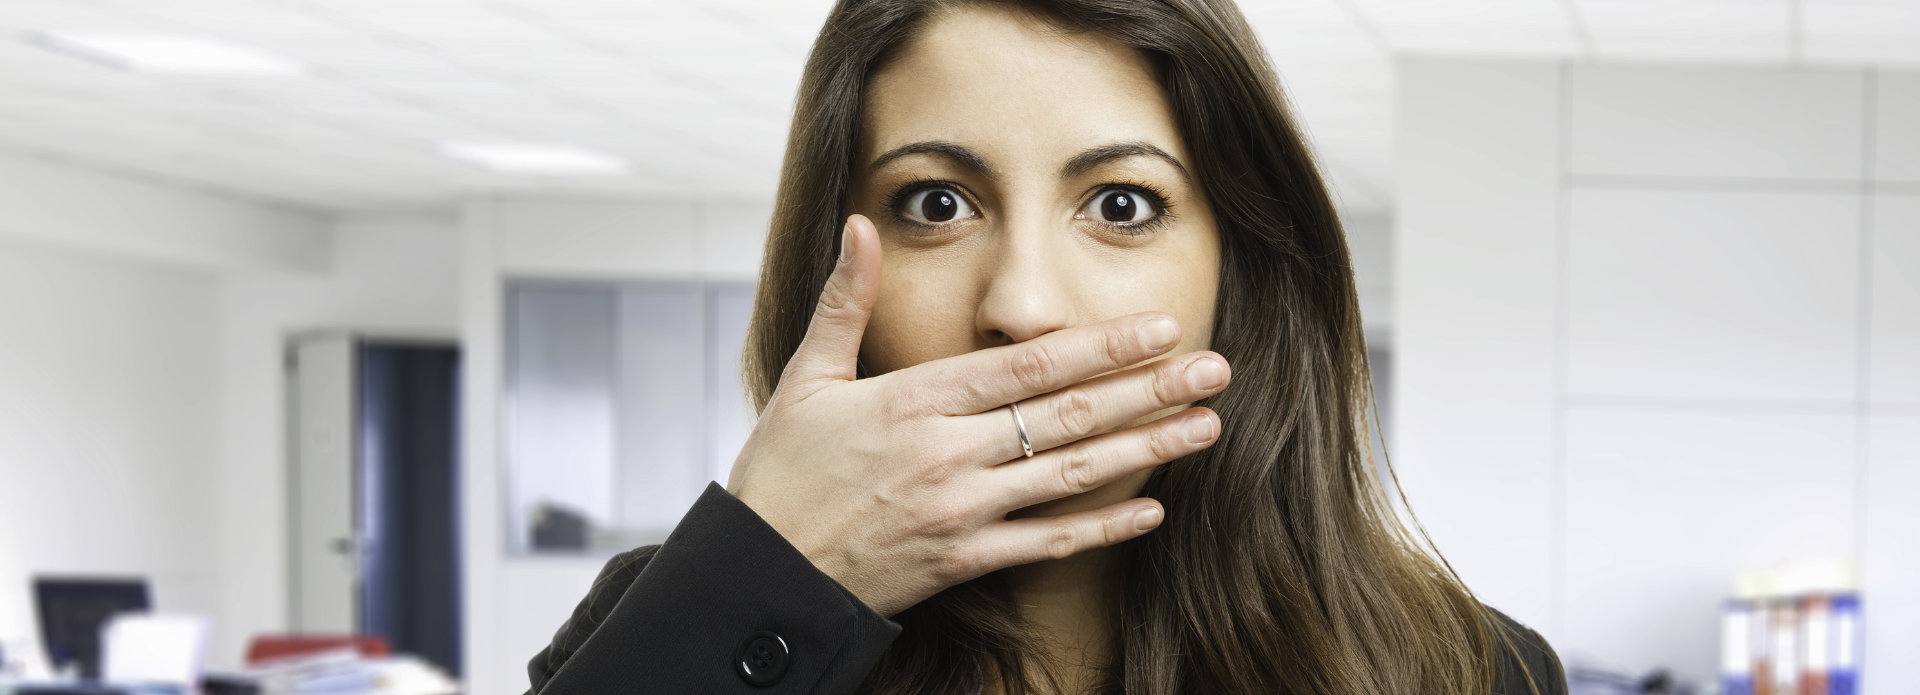 Concerned young woman covering her mouth with a hand due to halitosis.